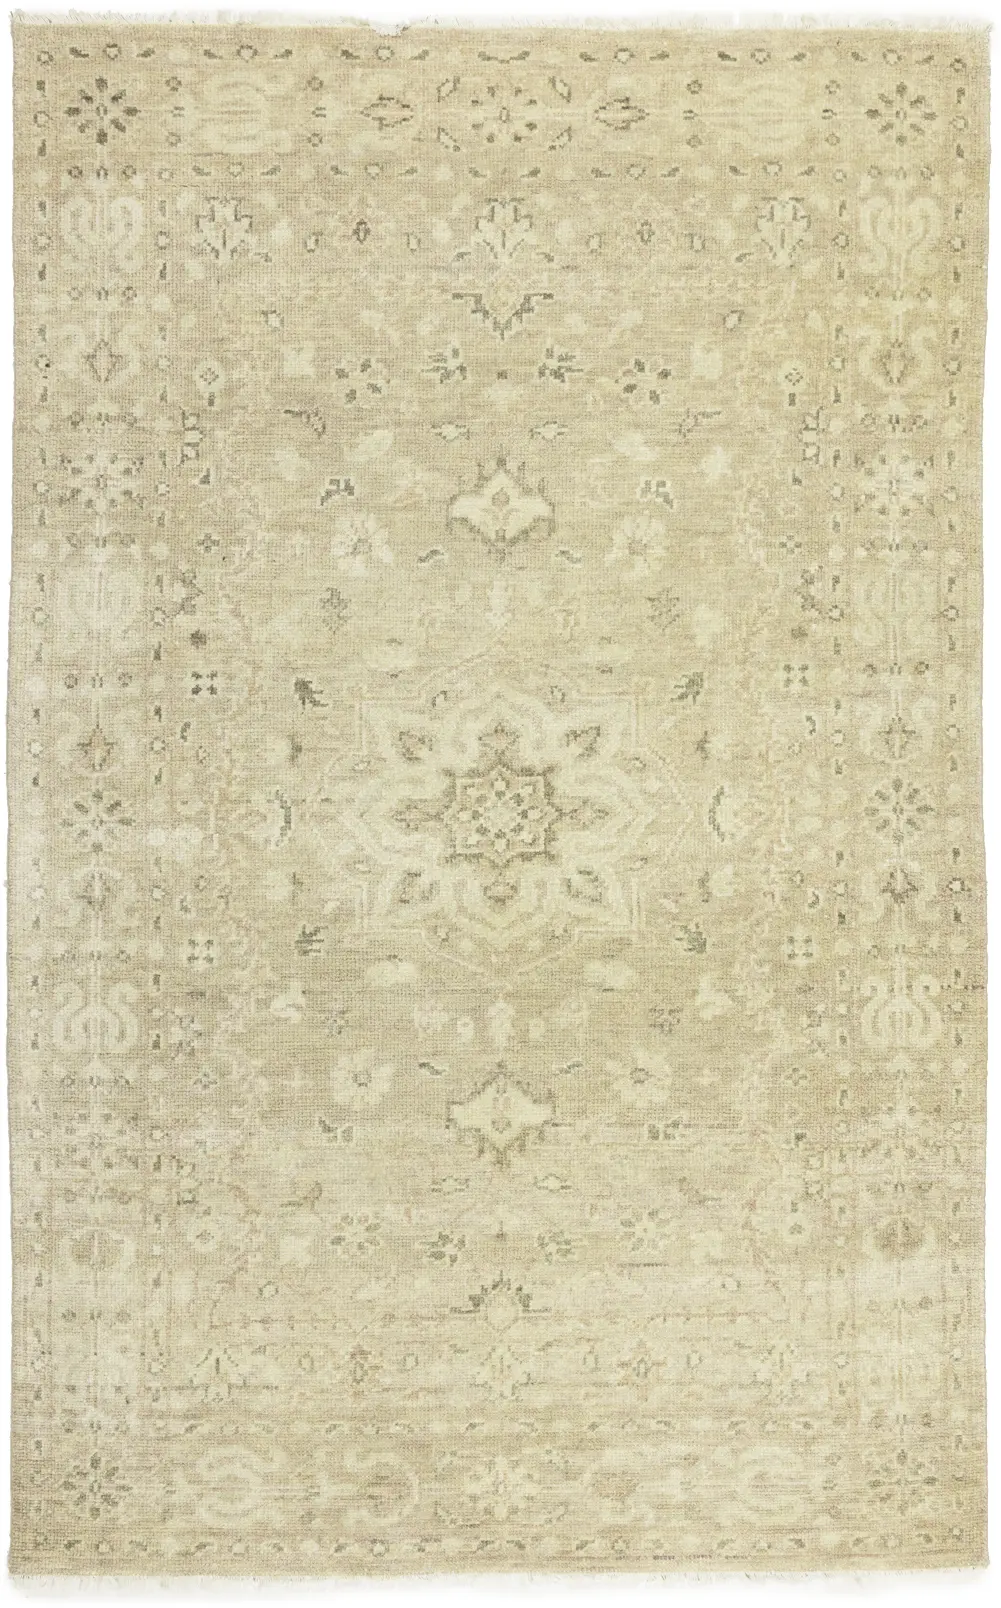 Muted Pinkish Beige Floral 4X6 Transitional Oriental Rug